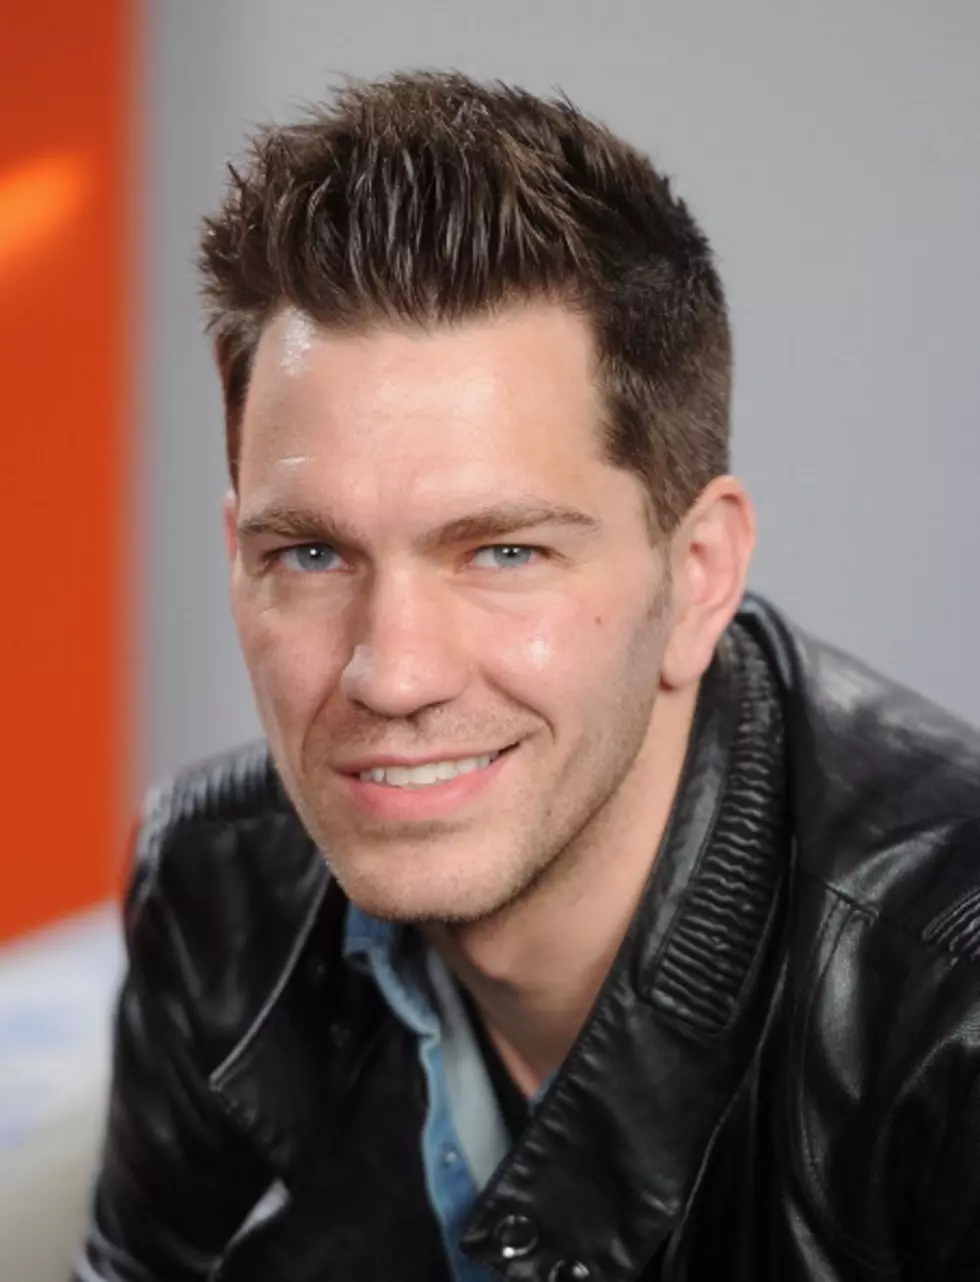 Want To Meet Andy Grammer at Boise Music Festival?